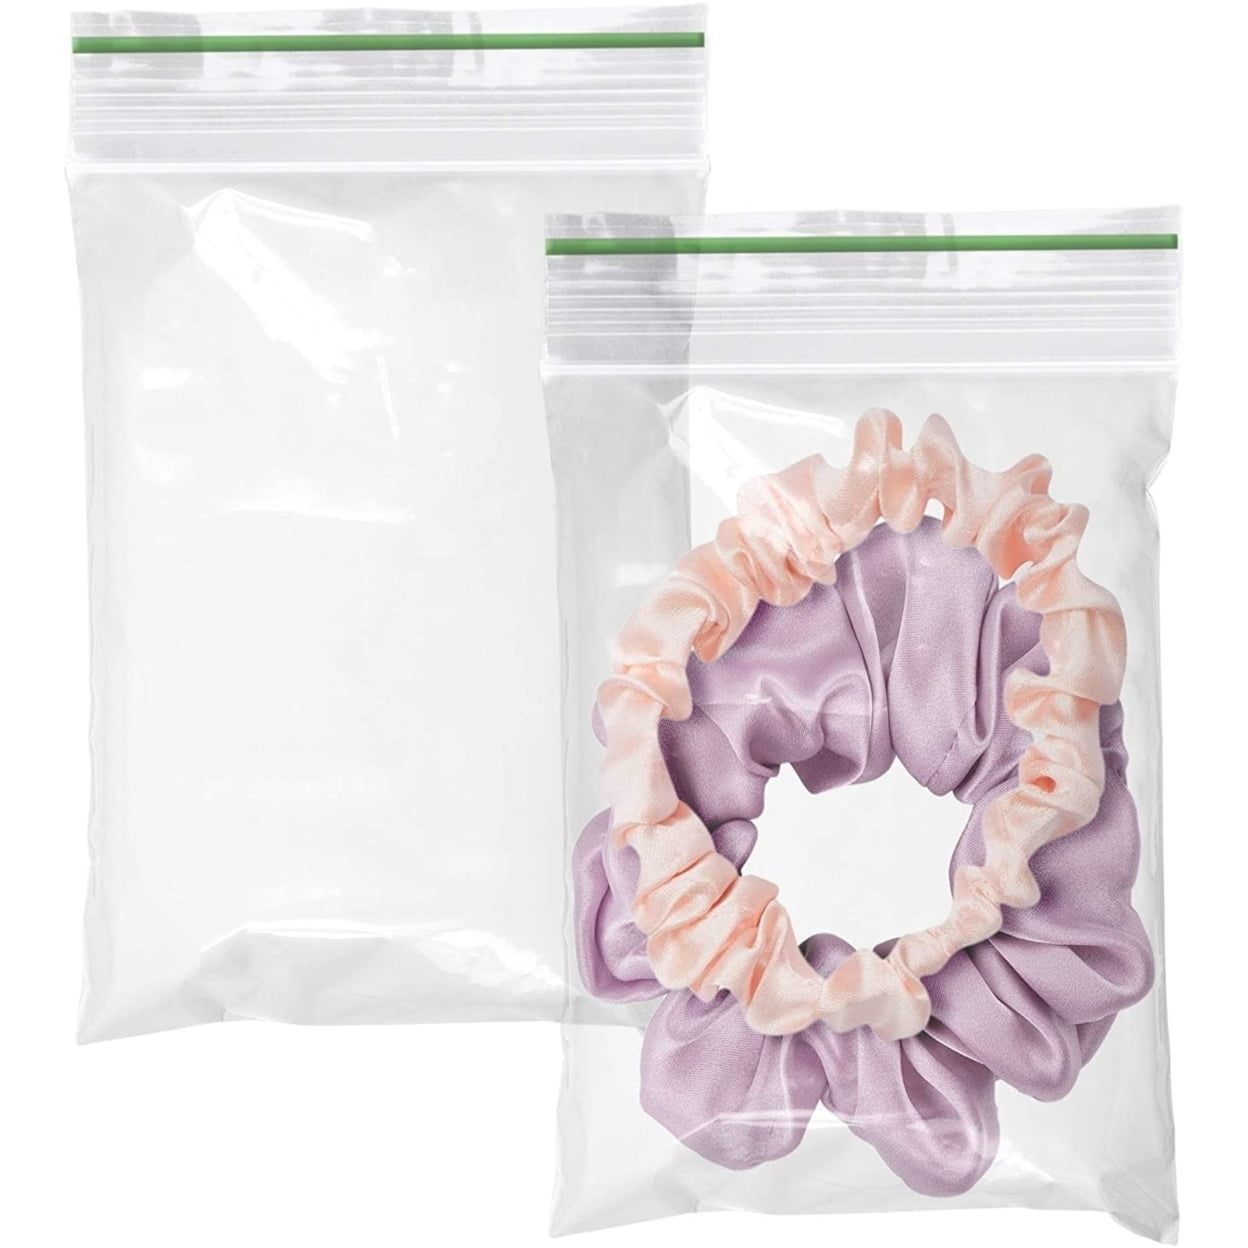 APQ Pack of 100 Greenline Zipper Bags 3 x 4 Resealable Polyethylene Bags 3x4 Thickness 2 Mil Storage Bags for Packing Storing Plastic Bags for